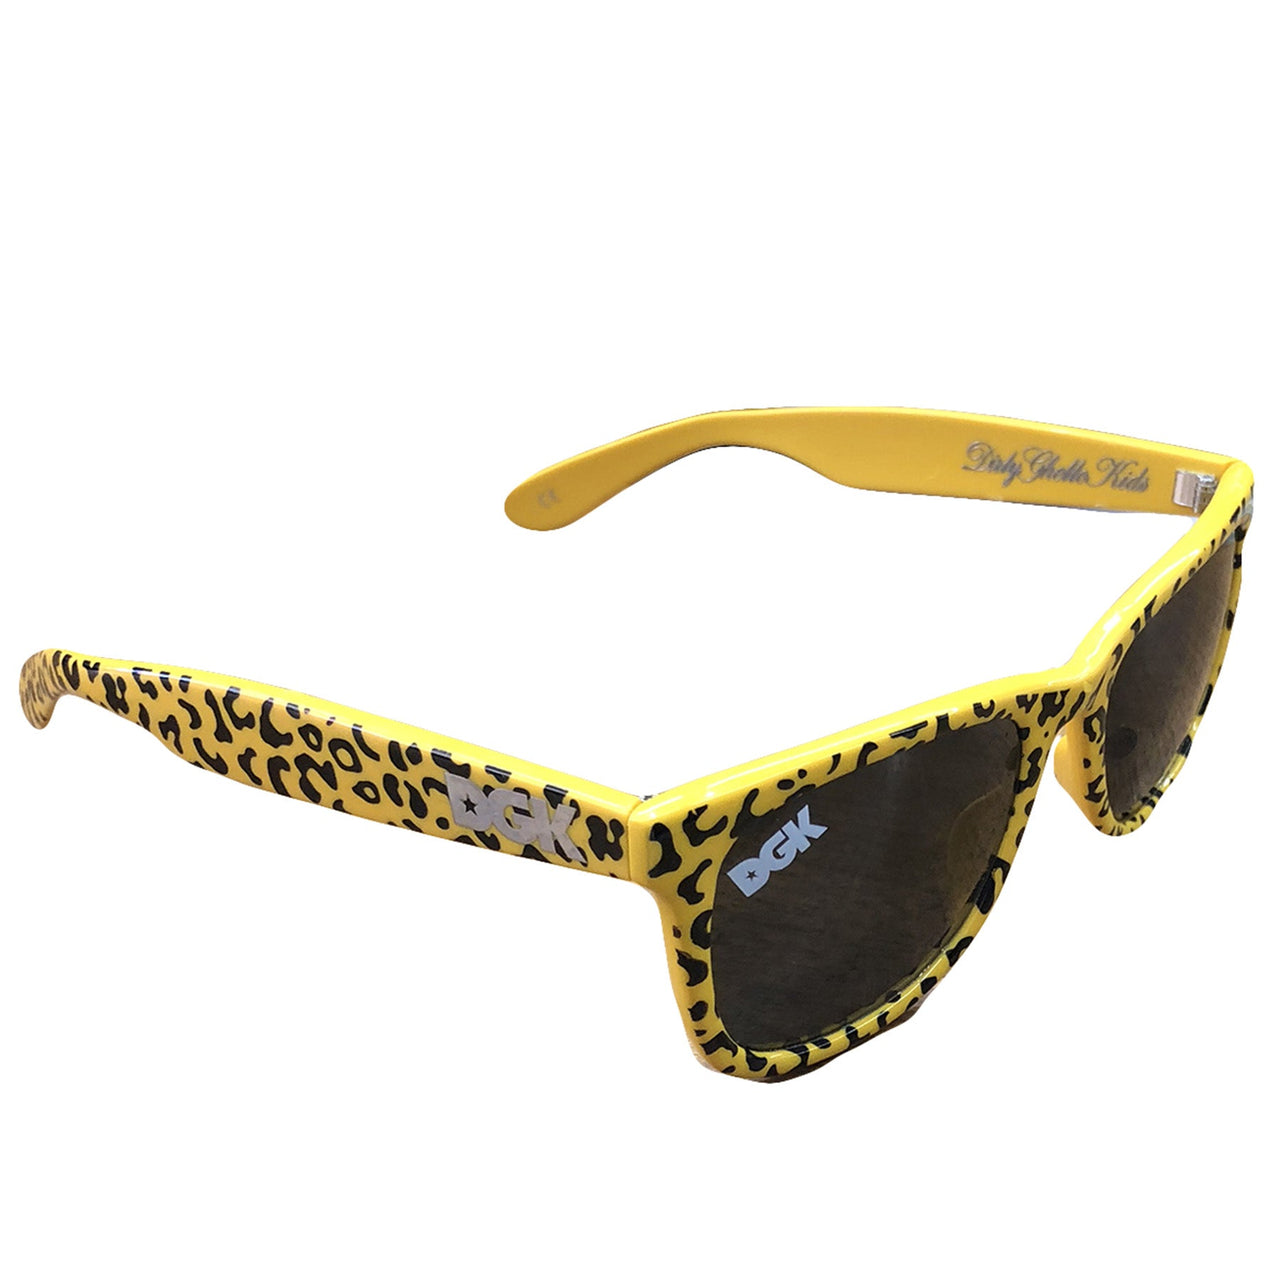 on the top right corner of the dgk yellow cheetah print sunglasses frame is the dgk logo in white